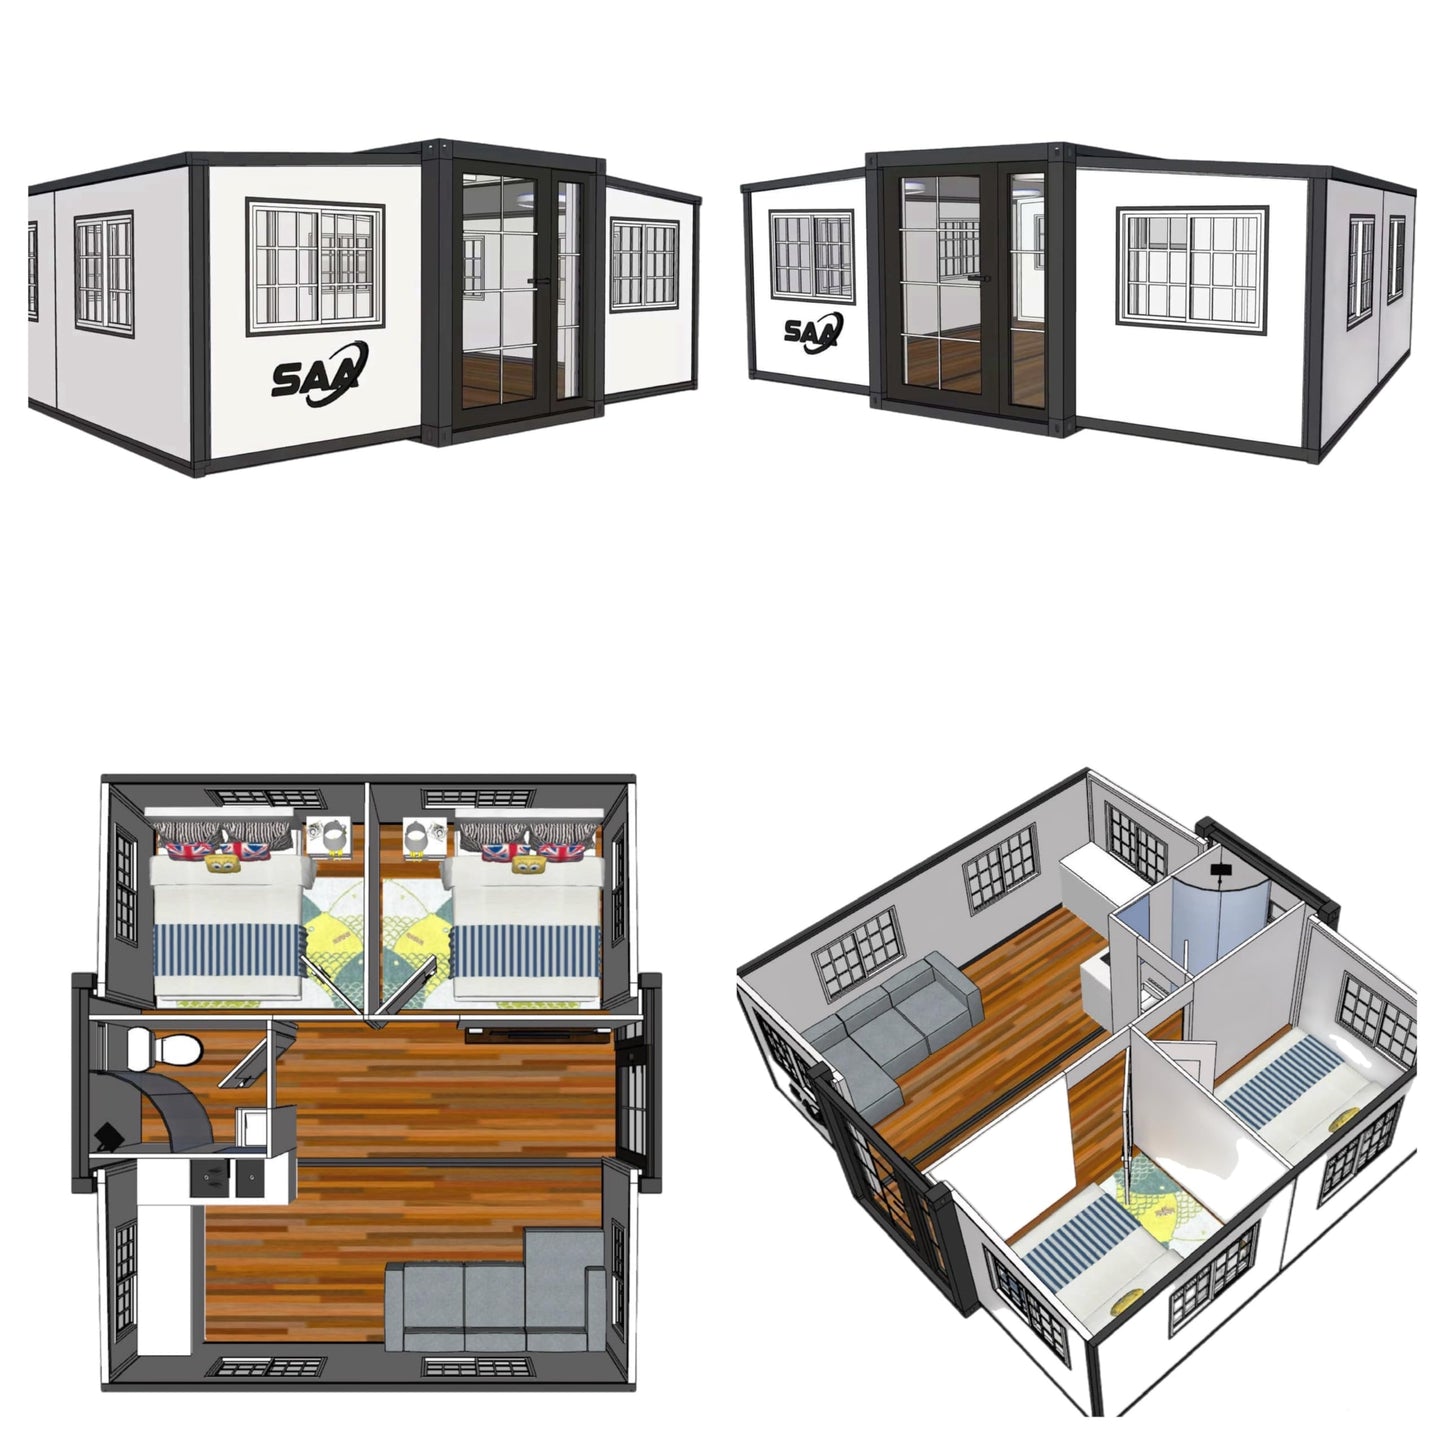 SAA Tiny Expandable Prefab House to Live in 1 Bathroom, 2 Rooms & 1 Kitchen- Foldable House, Container Home, Portable House, Tiny House for Small Family, Modular Guest House – 19 x 20 FT